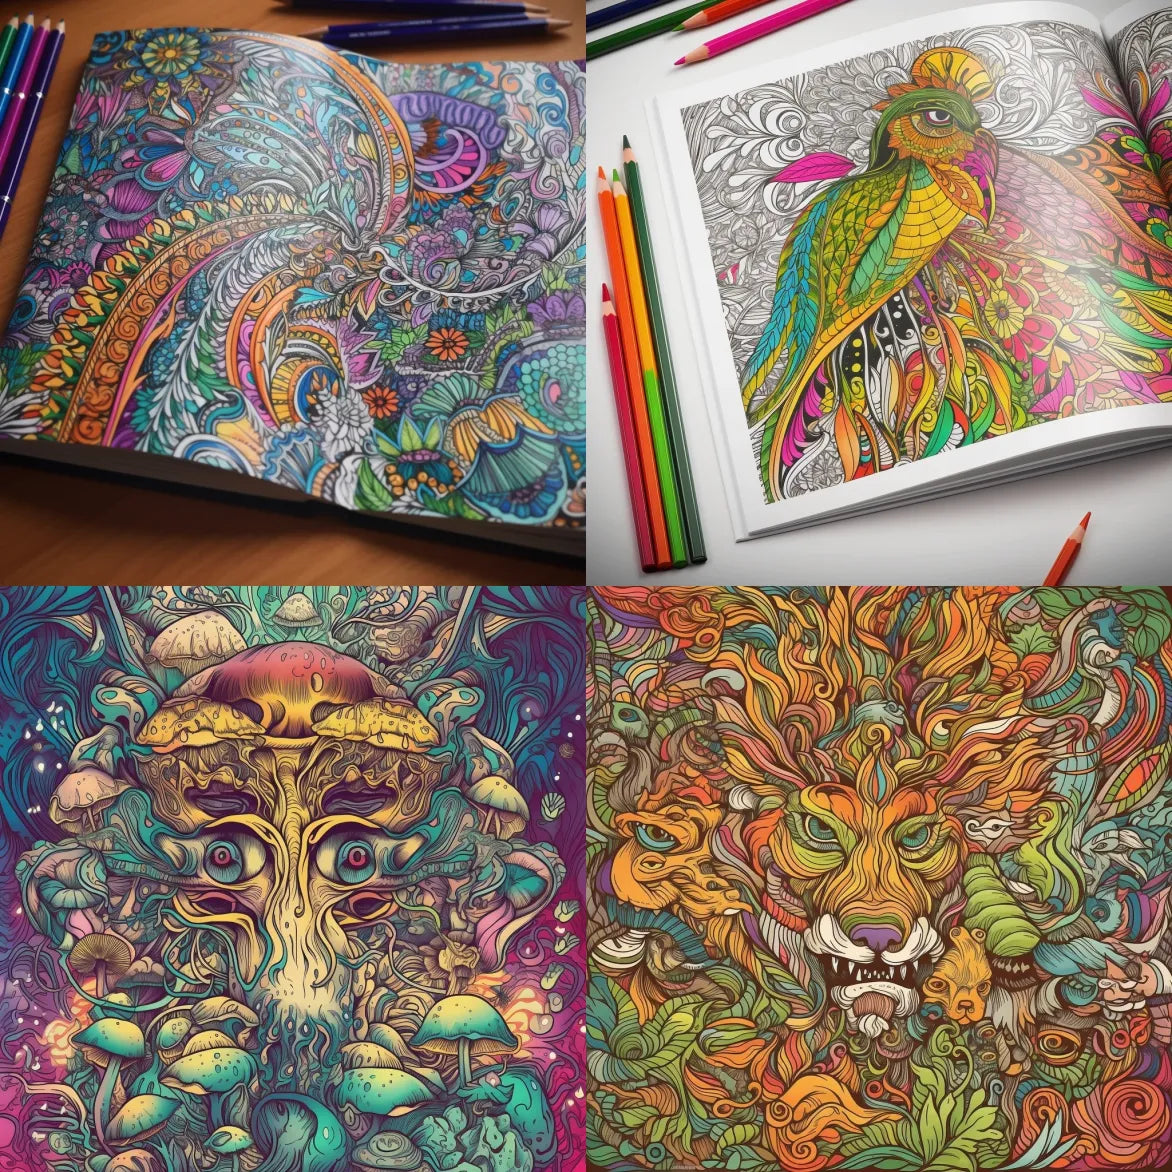 Surreal Paintings Coloring Book for Adults: Trippy Coloring Book